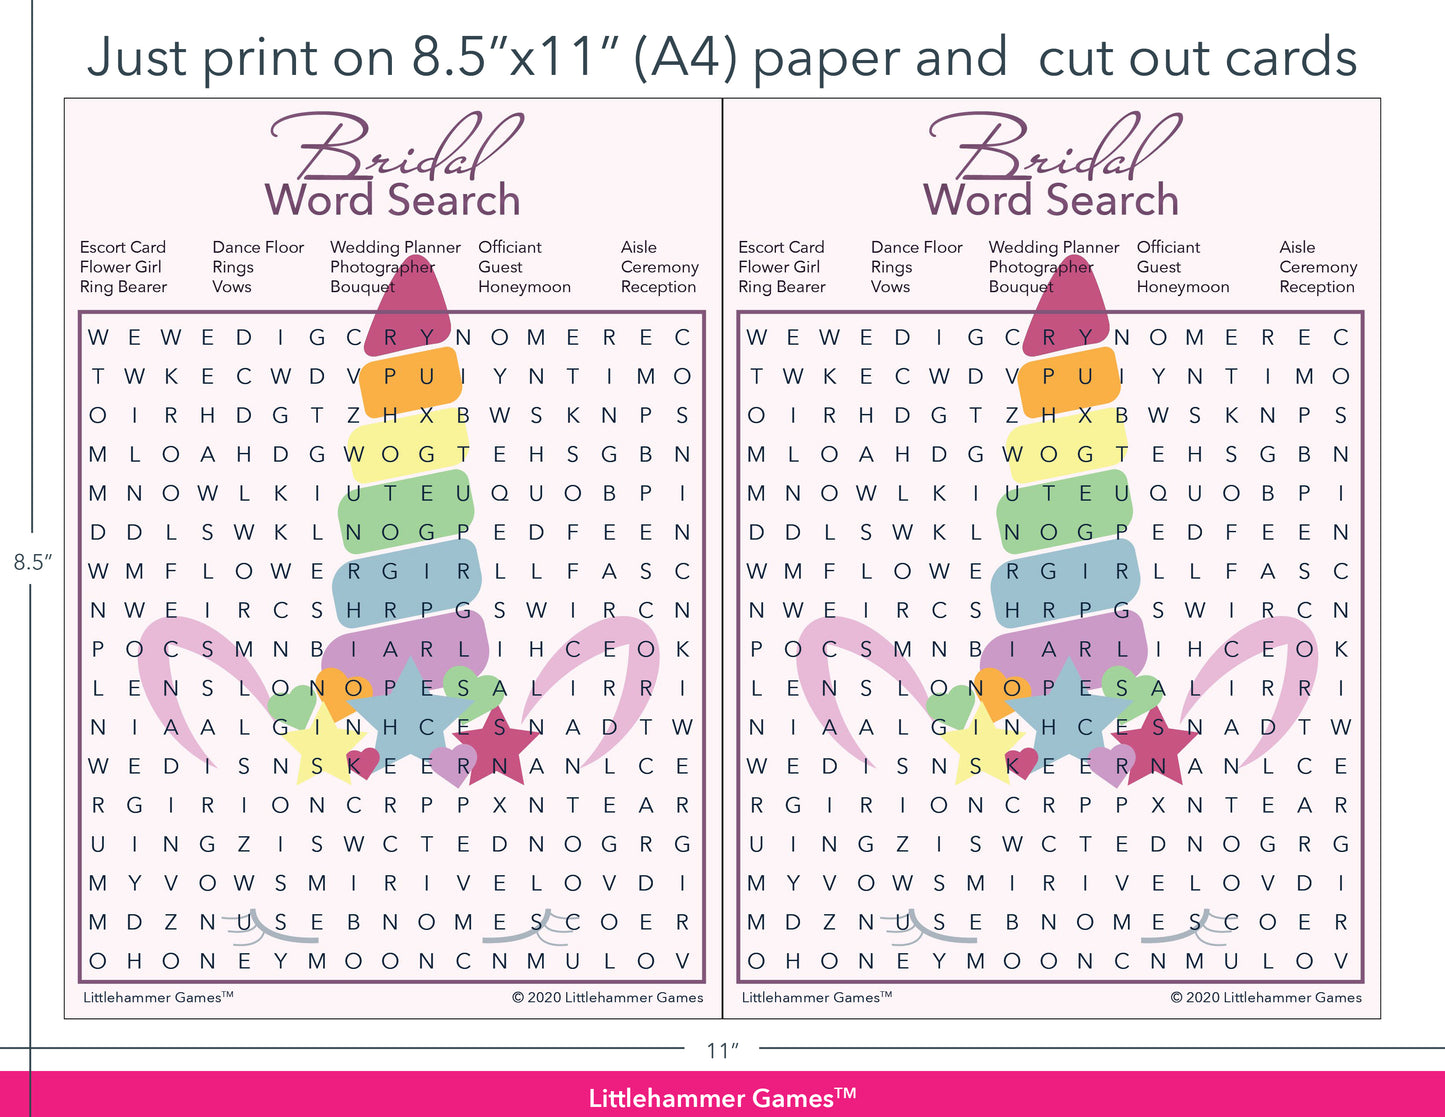 Bridal Word Search unicorn game cards with printing instructions